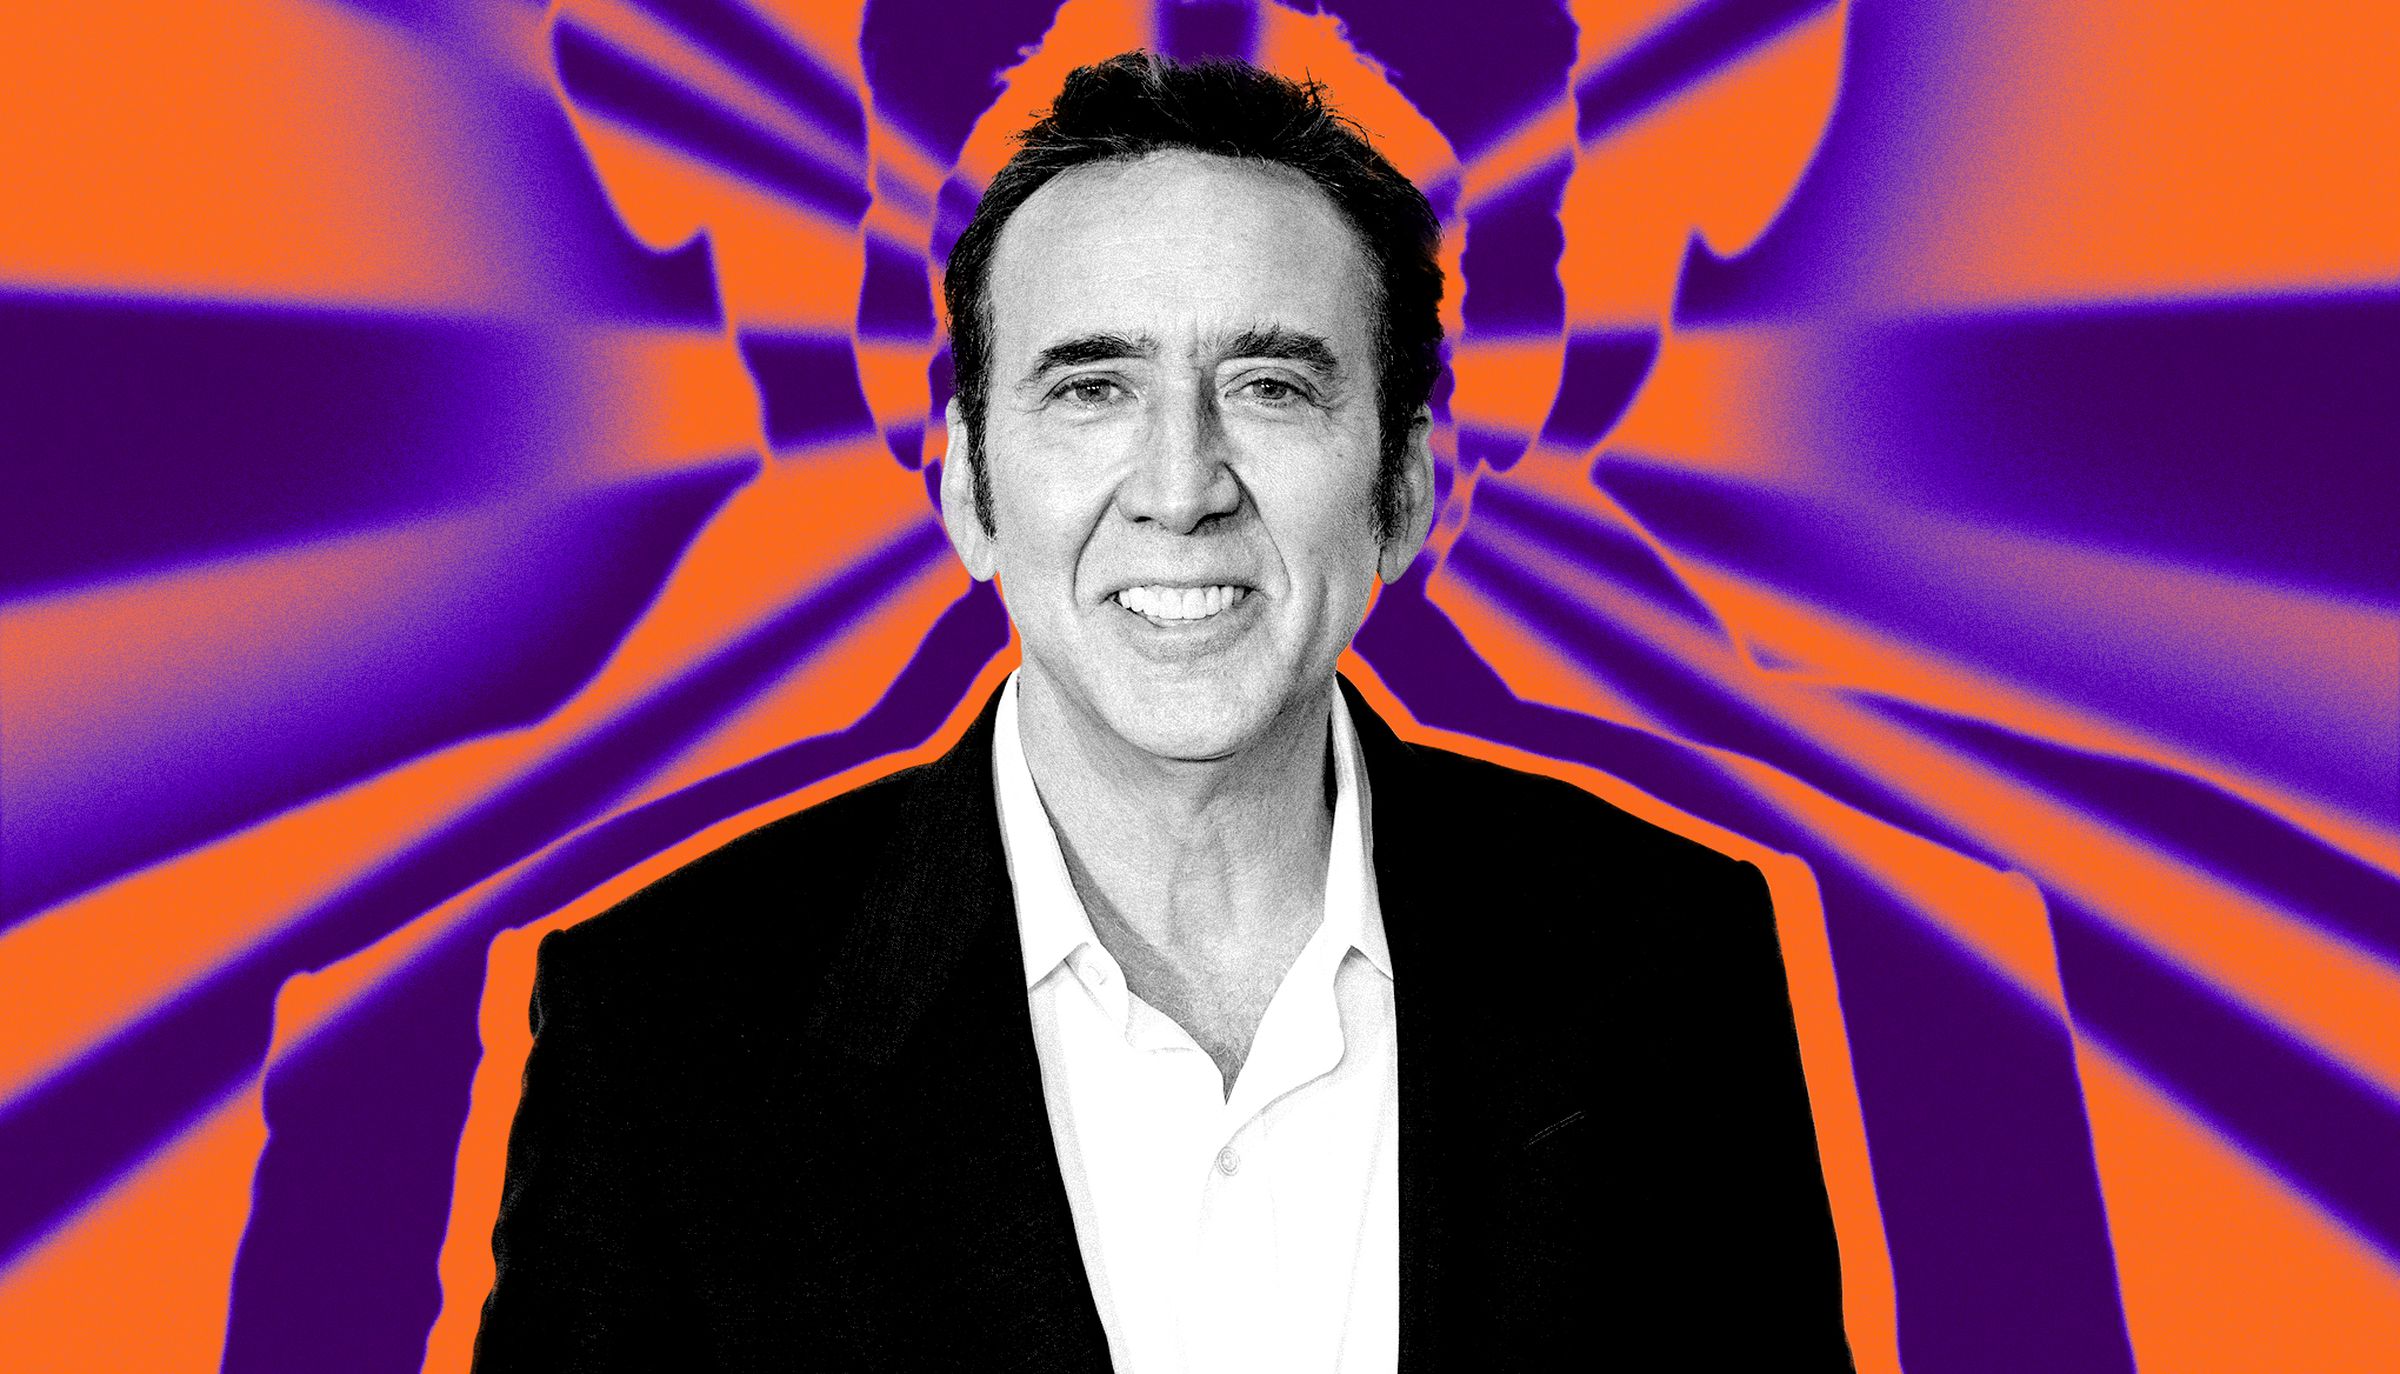 With Dream Scenario, Nic Cage wants to let you in on a secret